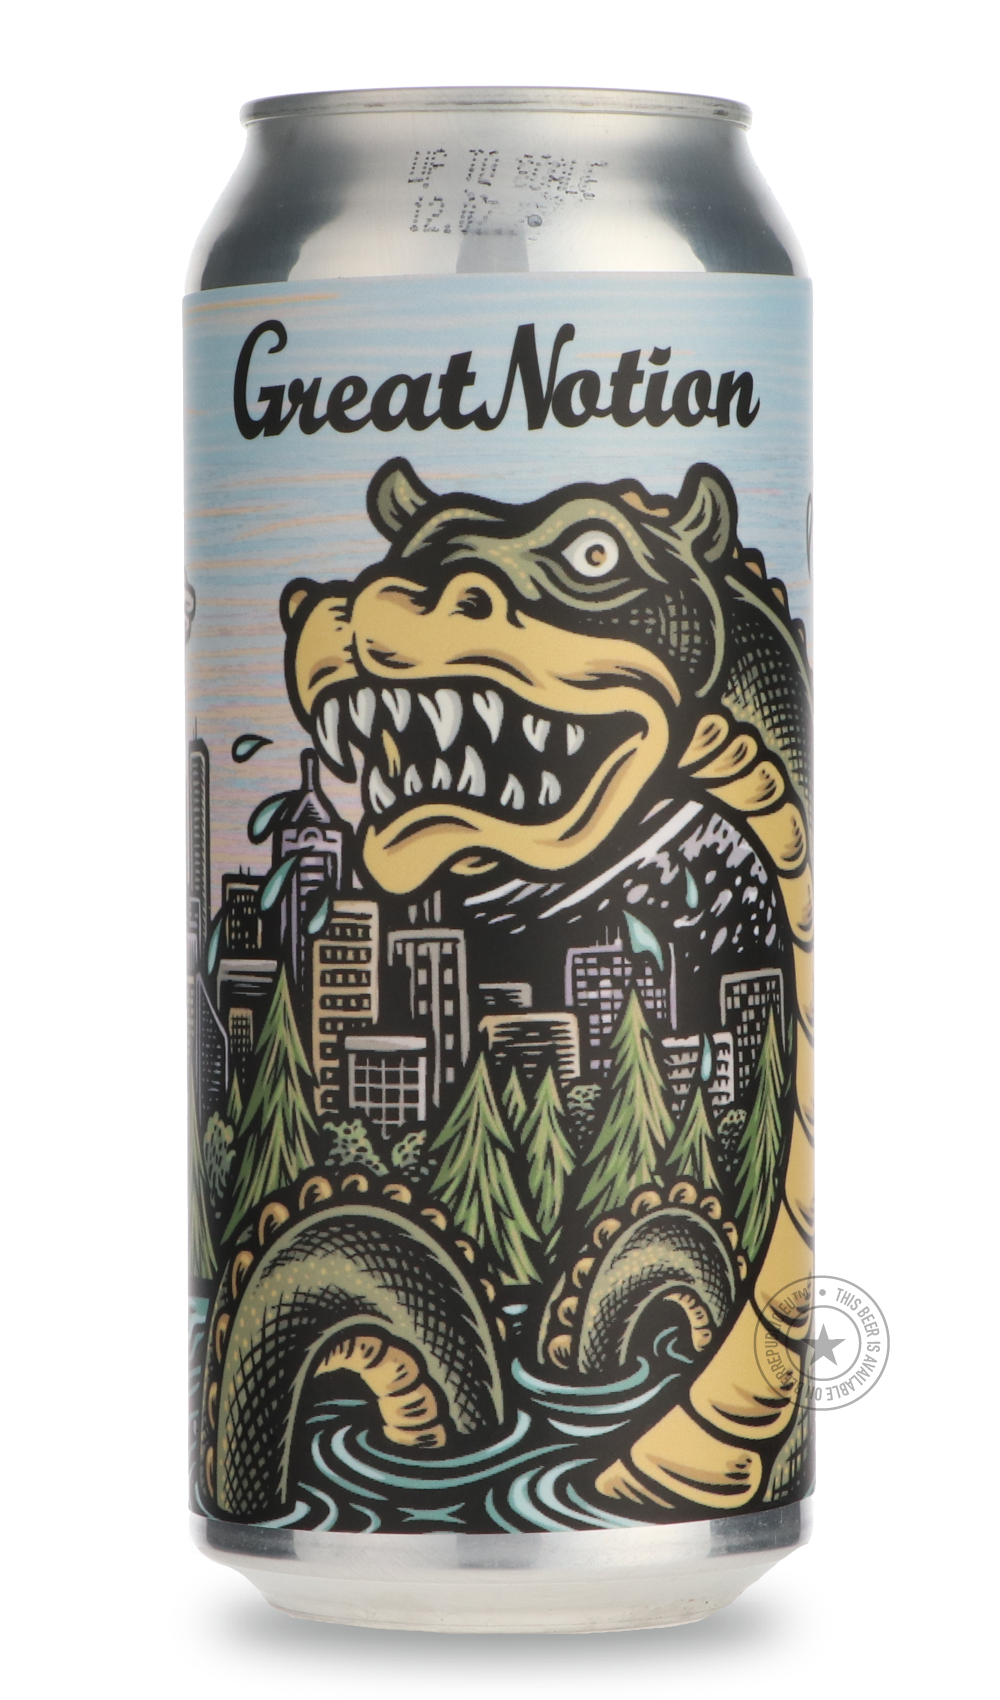 -Great Notion- Oggy-IPA- Only @ Beer Republic - The best online beer store for American & Canadian craft beer - Buy beer online from the USA and Canada - Bier online kopen - Amerikaans bier kopen - Craft beer store - Craft beer kopen - Amerikanisch bier kaufen - Bier online kaufen - Acheter biere online - IPA - Stout - Porter - New England IPA - Hazy IPA - Imperial Stout - Barrel Aged - Barrel Aged Imperial Stout - Brown - Dark beer - Blond - Blonde - Pilsner - Lager - Wheat - Weizen - Amber - Barley Wine -